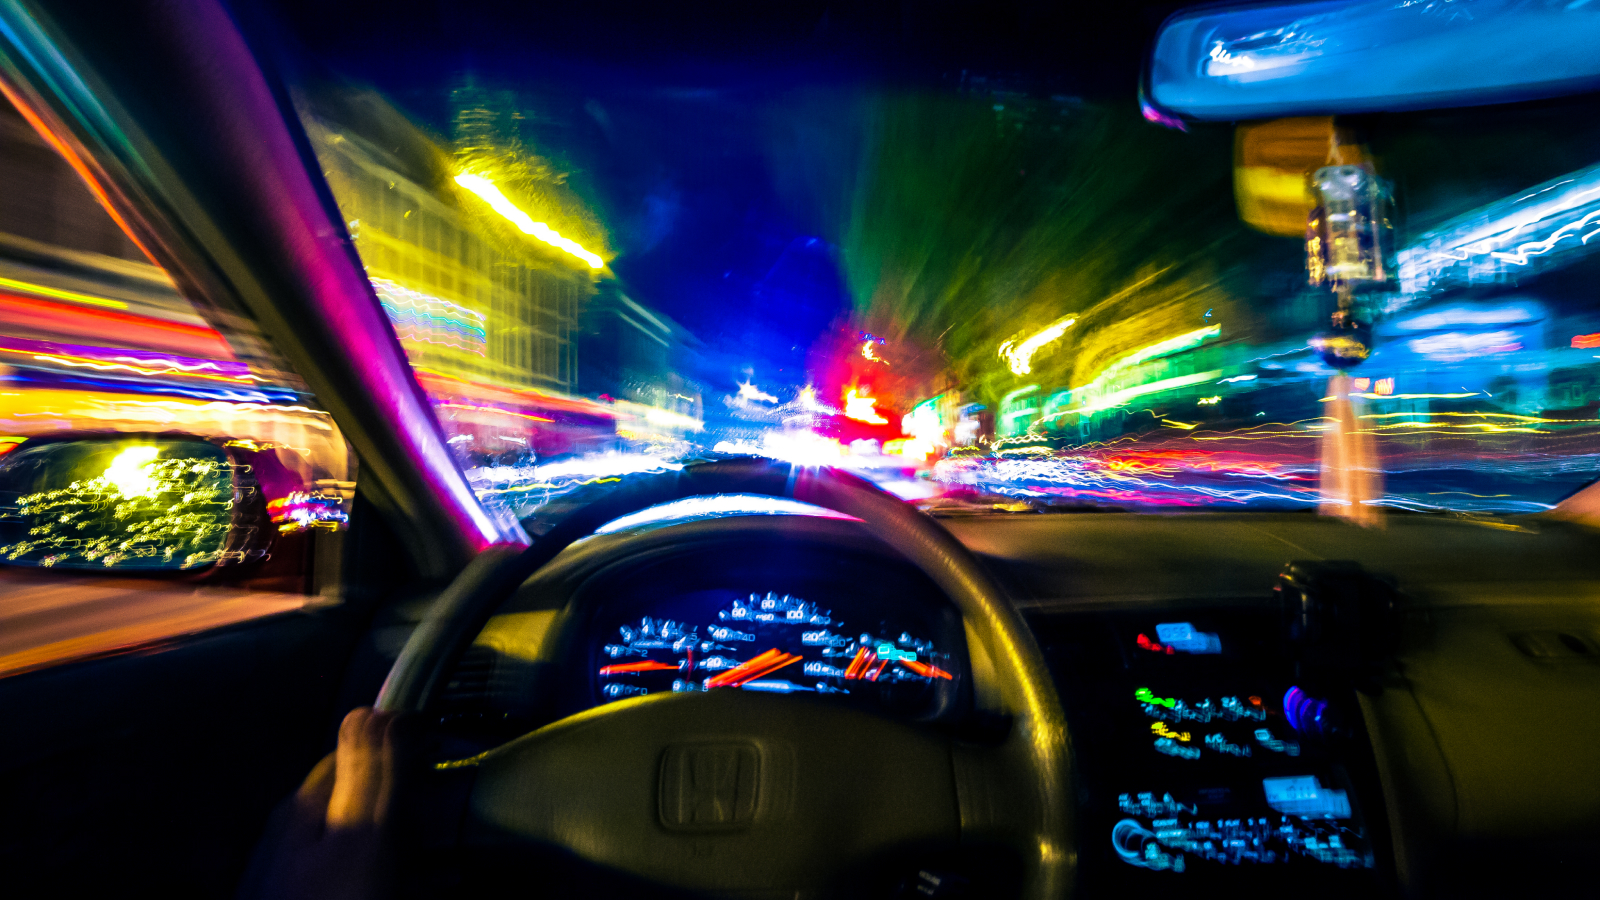  New in-vehicle AI algorithm can spot drunk drivers by constantly scanning their faces for signs of intoxication 